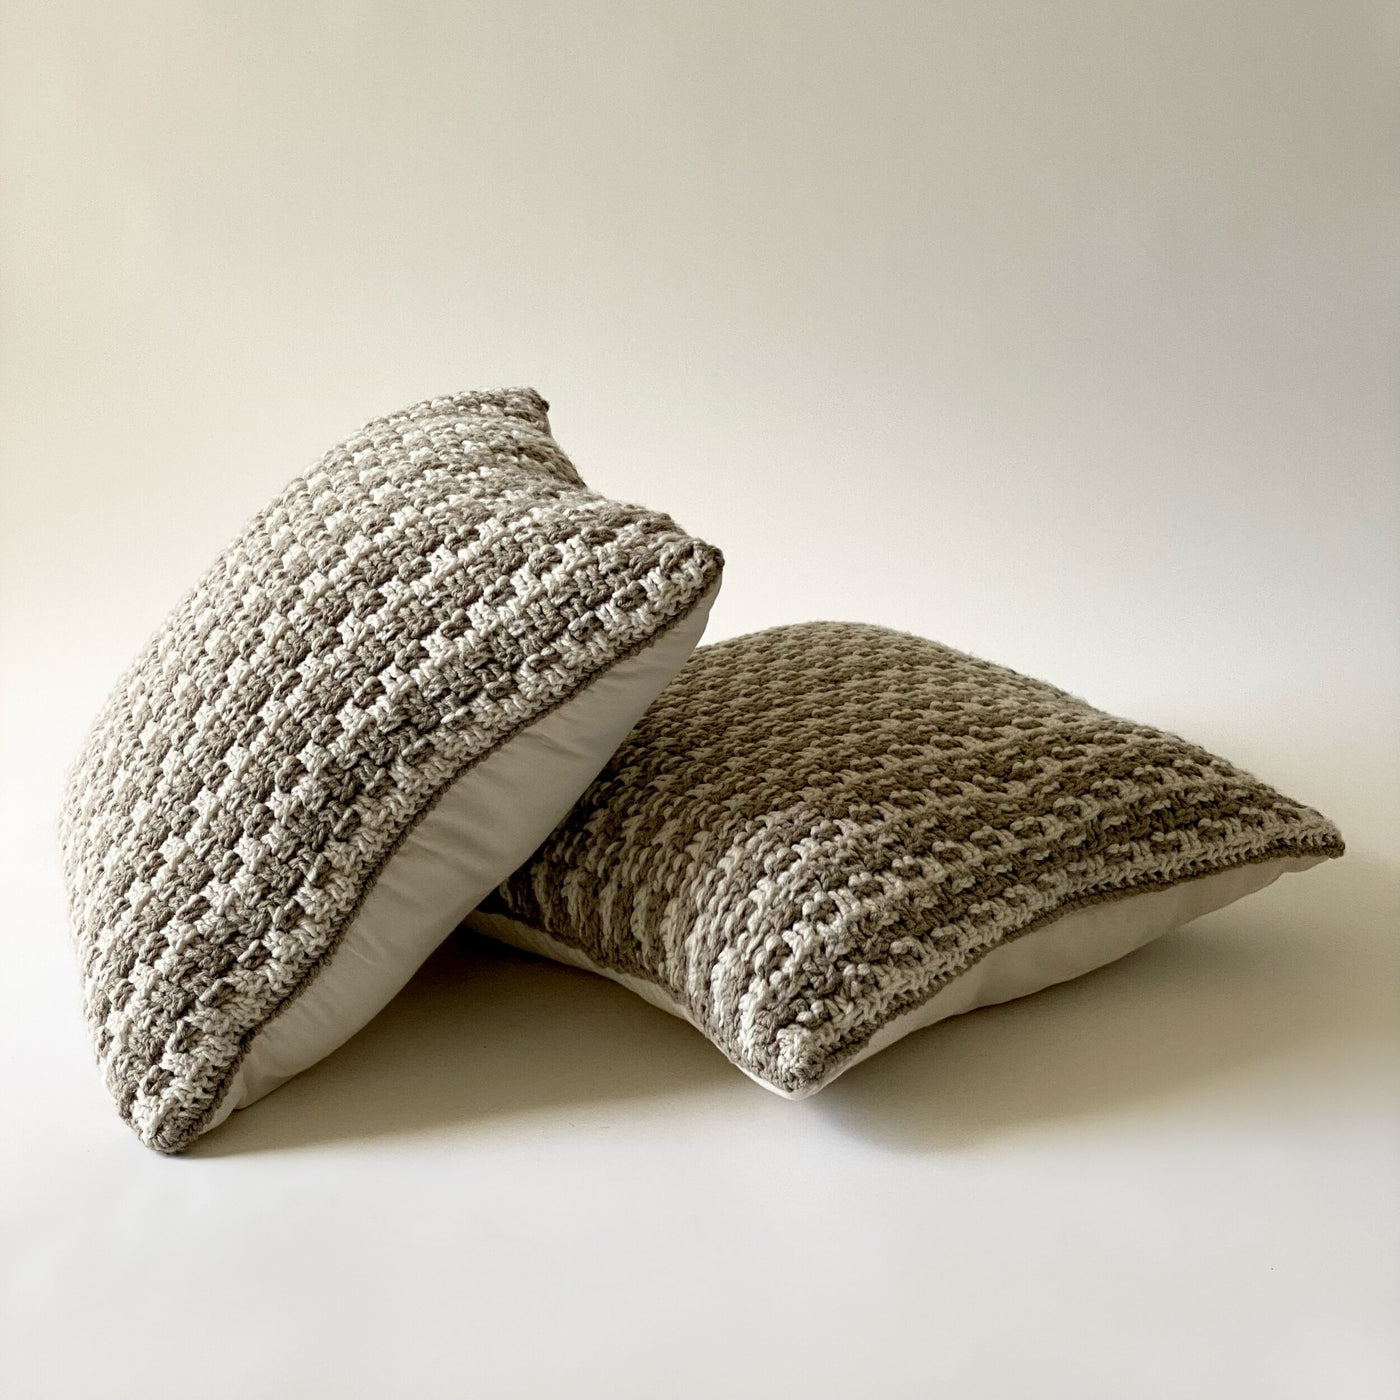 Souby Pillow